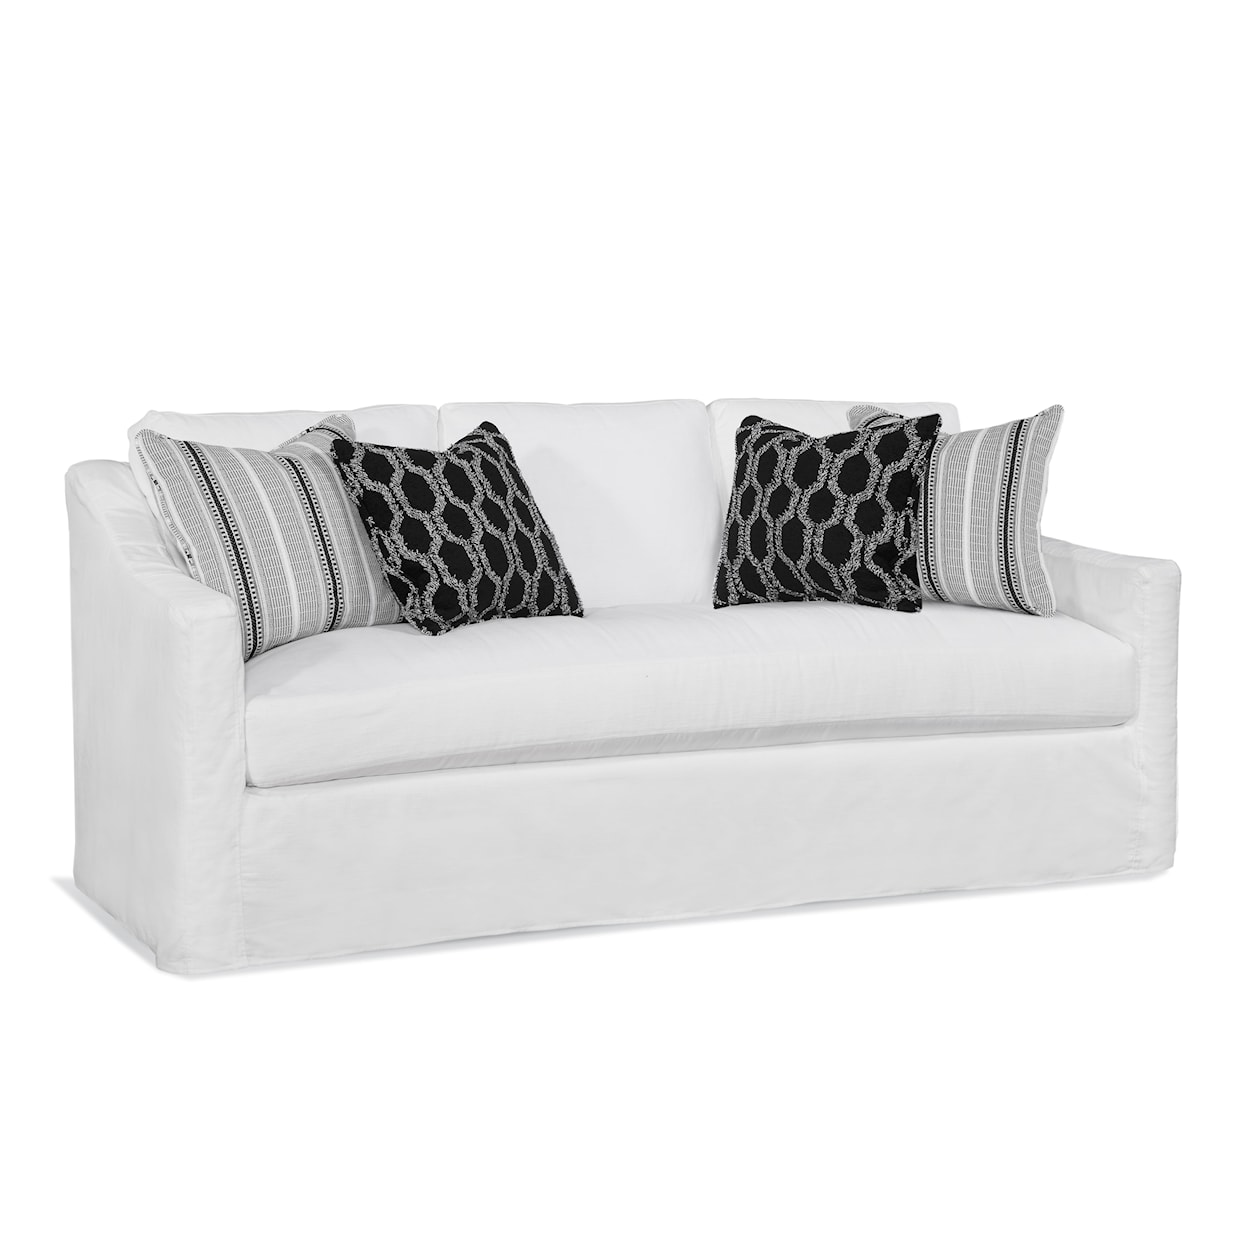 Braxton Culler Oliver Oliver 3 over 1 Bench Seat Sofa w Slipcover